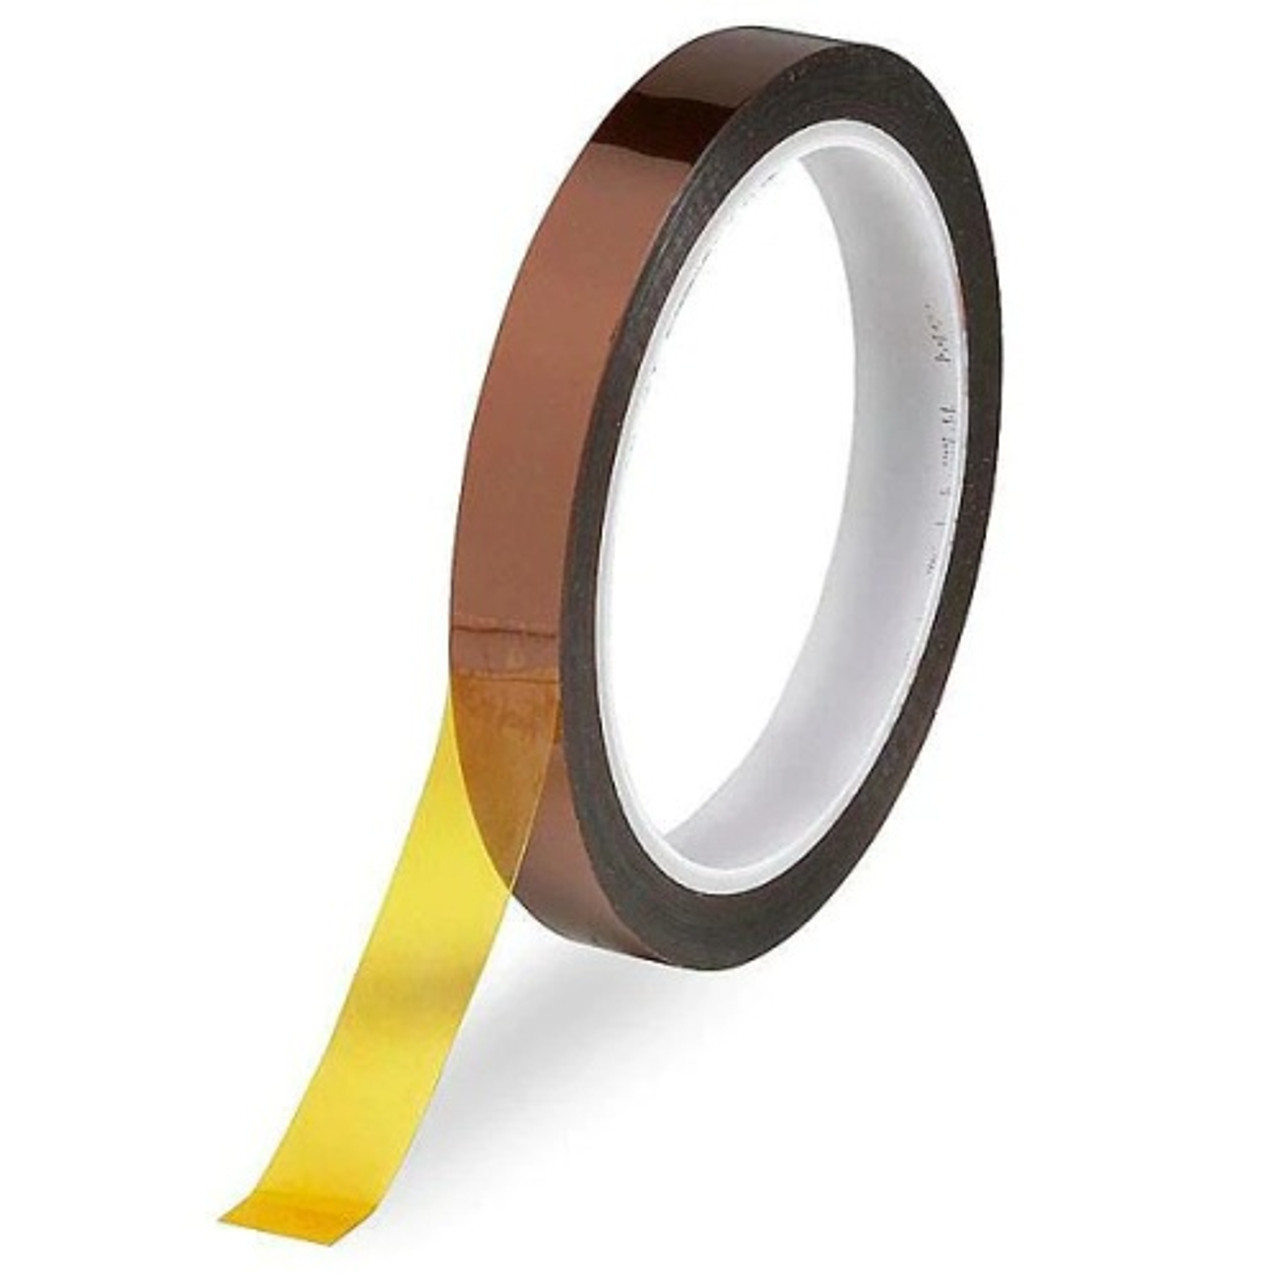 1 In. Wide x 36 Yards Long, 5 Mil Polyimide Masking Tape